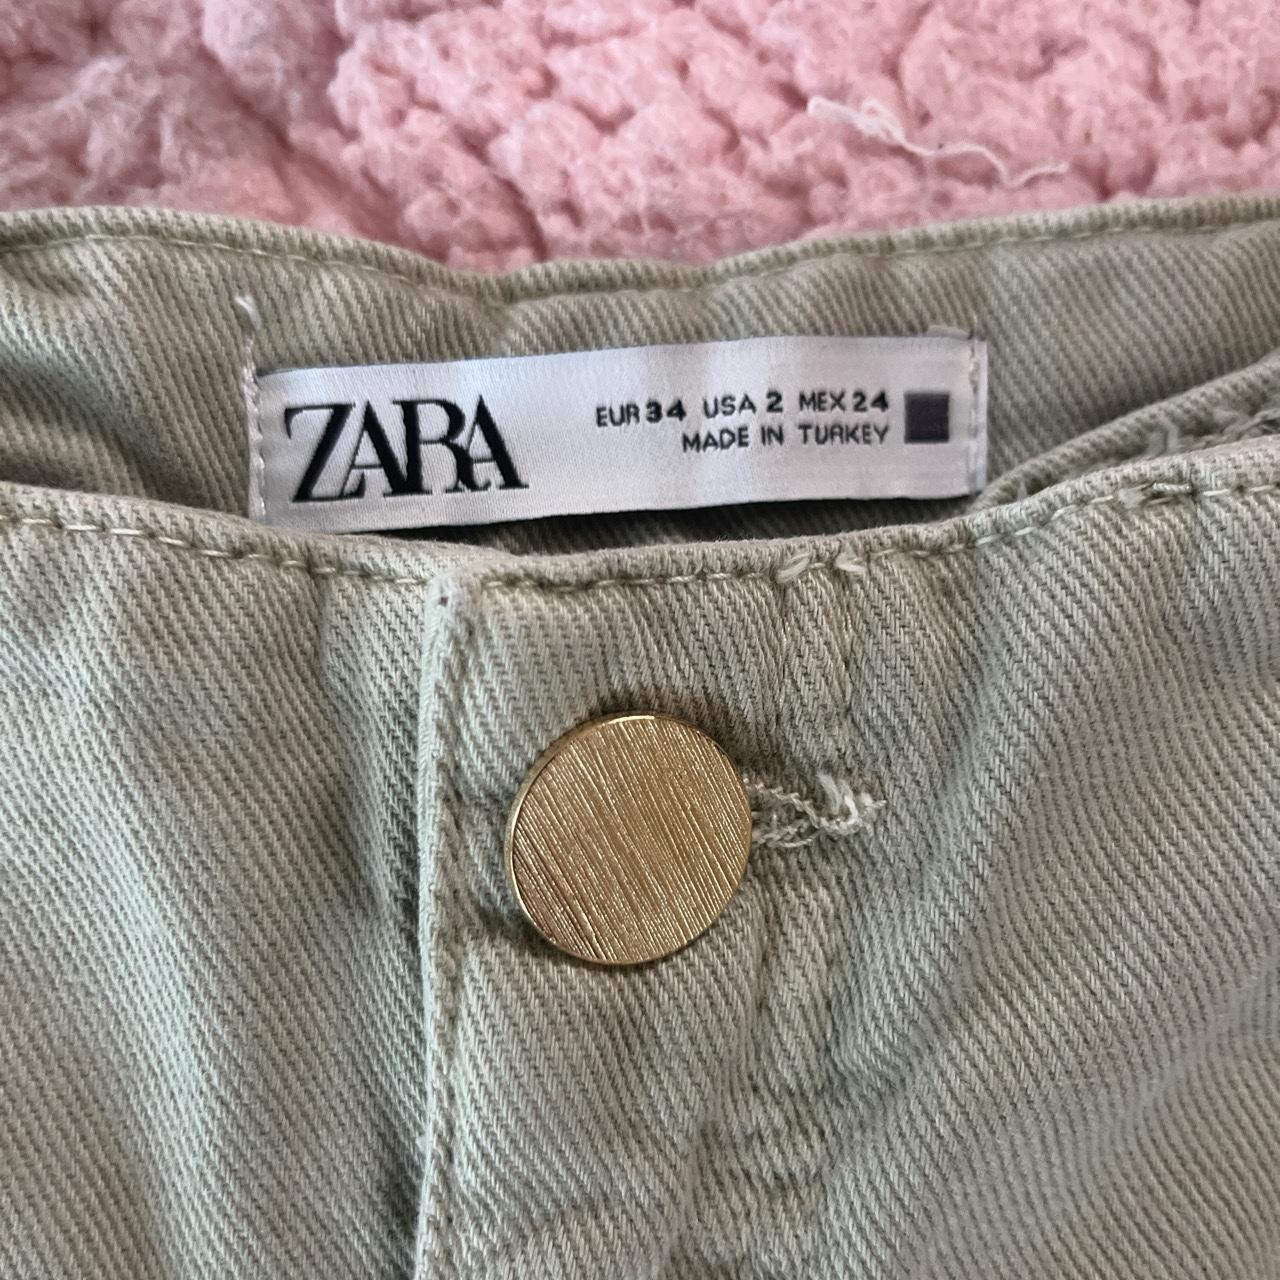 Zara jeans - olive green, size 2 Cropped and wide - Depop